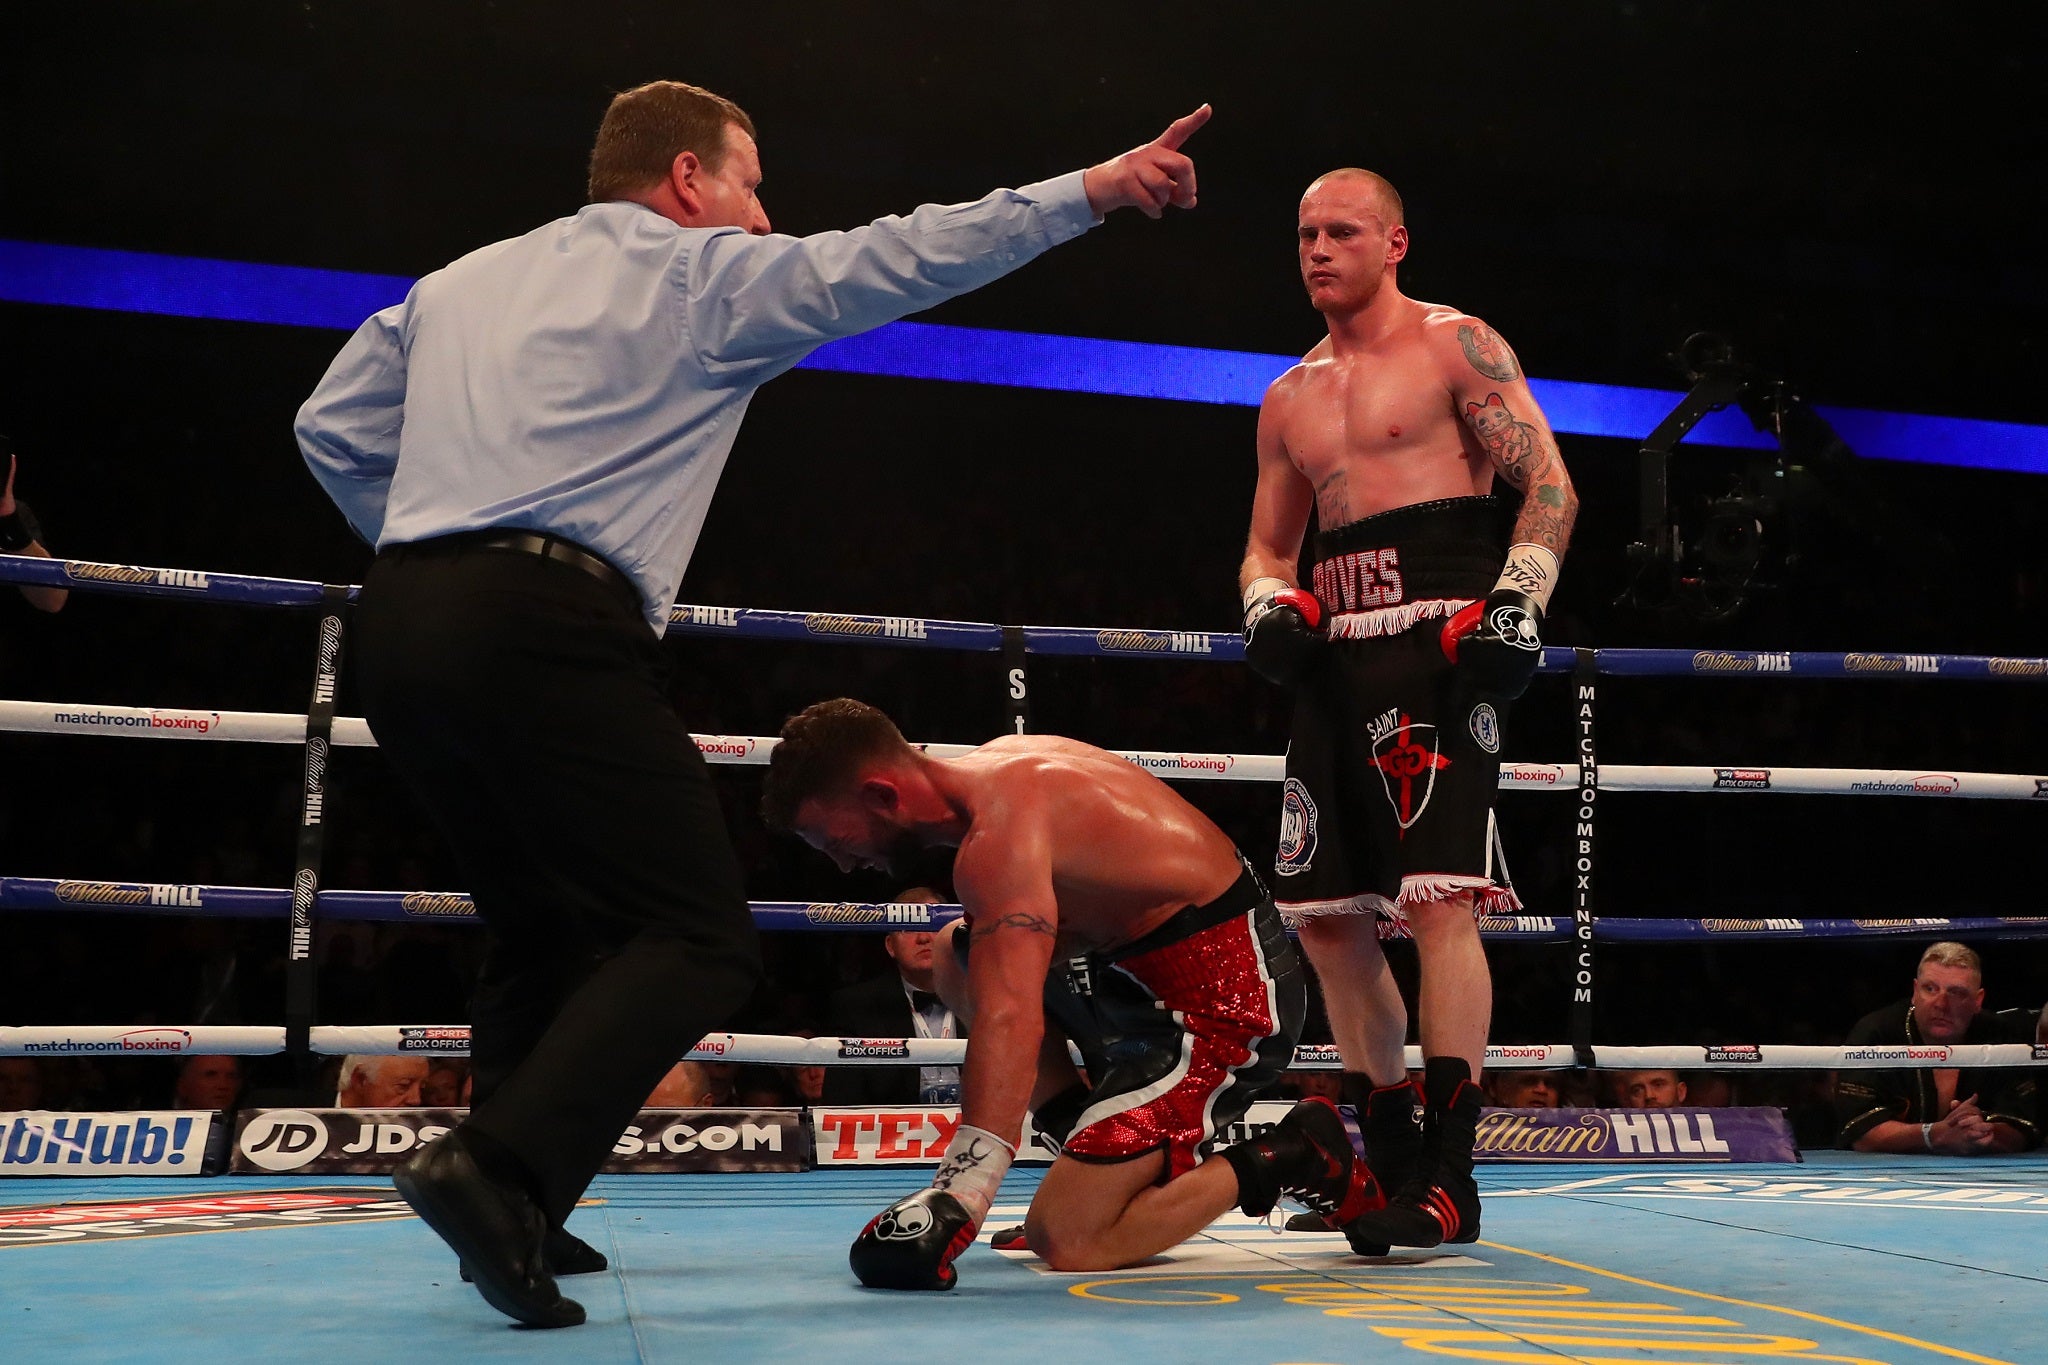 George Groves ends his fight with David Brophy by countout